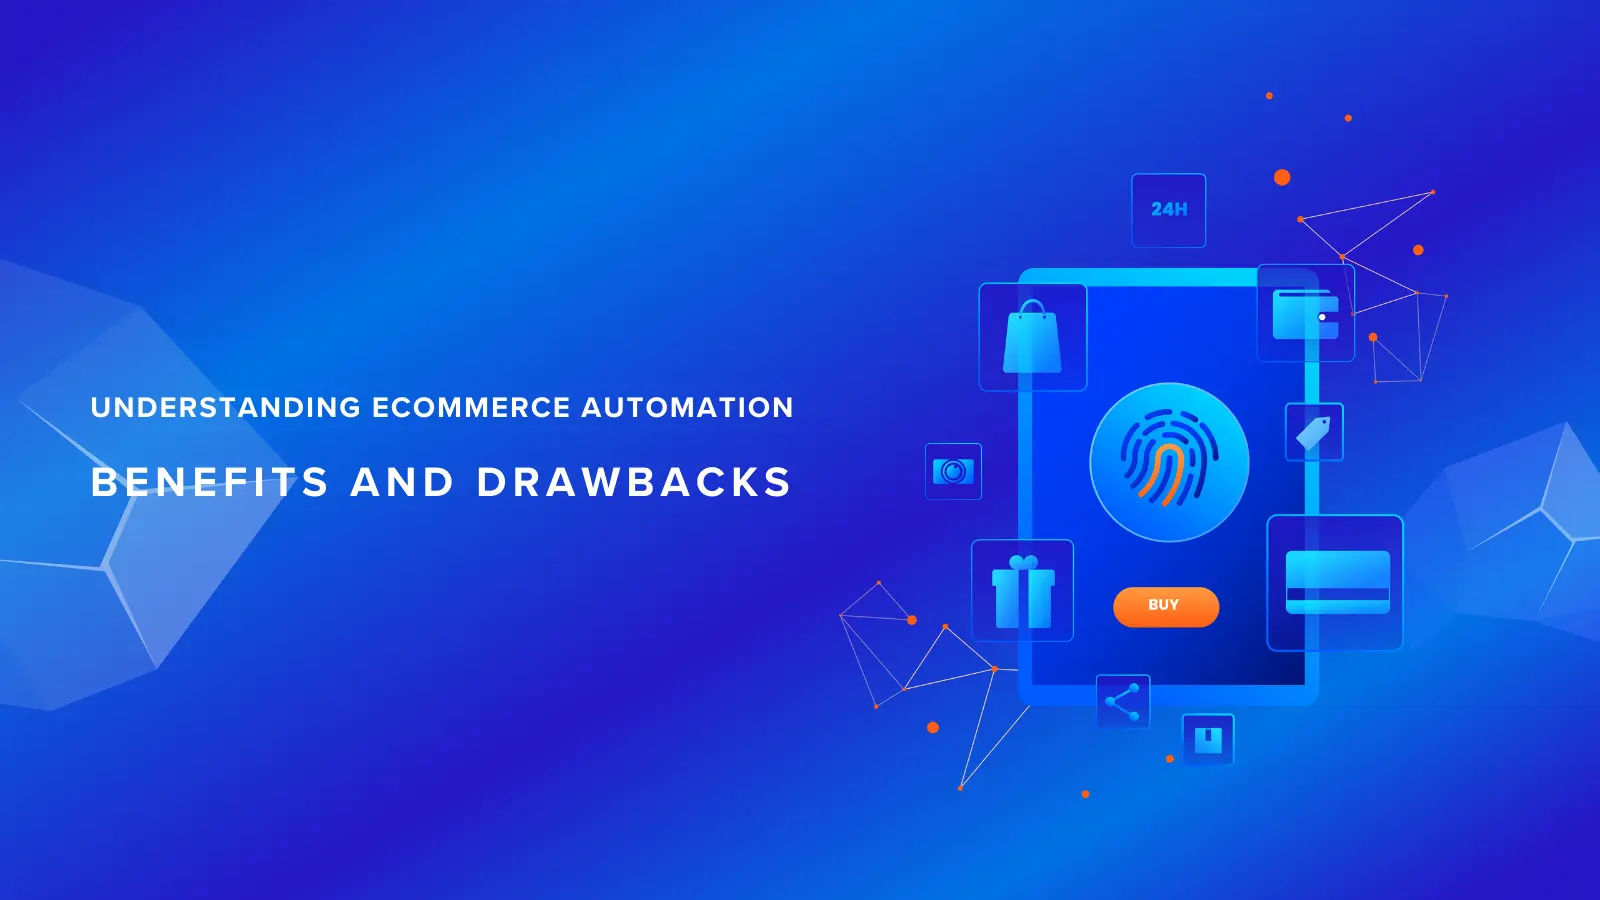 Understanding eCommerce Automation: Benefits and Drawbacks